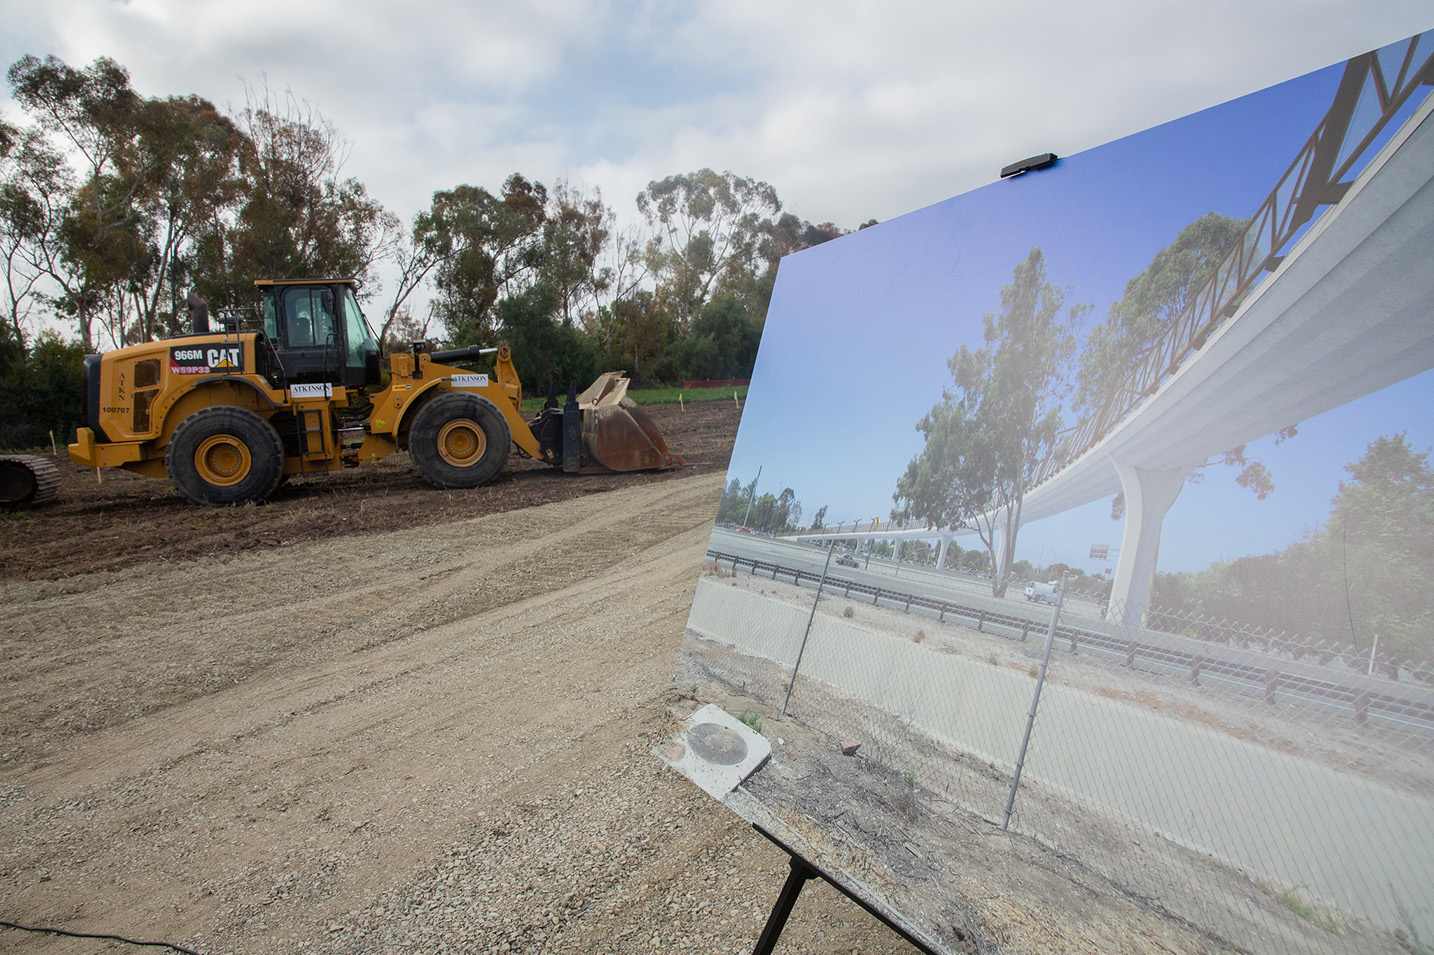 Groundbreaking for the Jeffrey Open Space Trail (JOST) Bicycle and Pedestrian Bridge Project in Irvine, California.